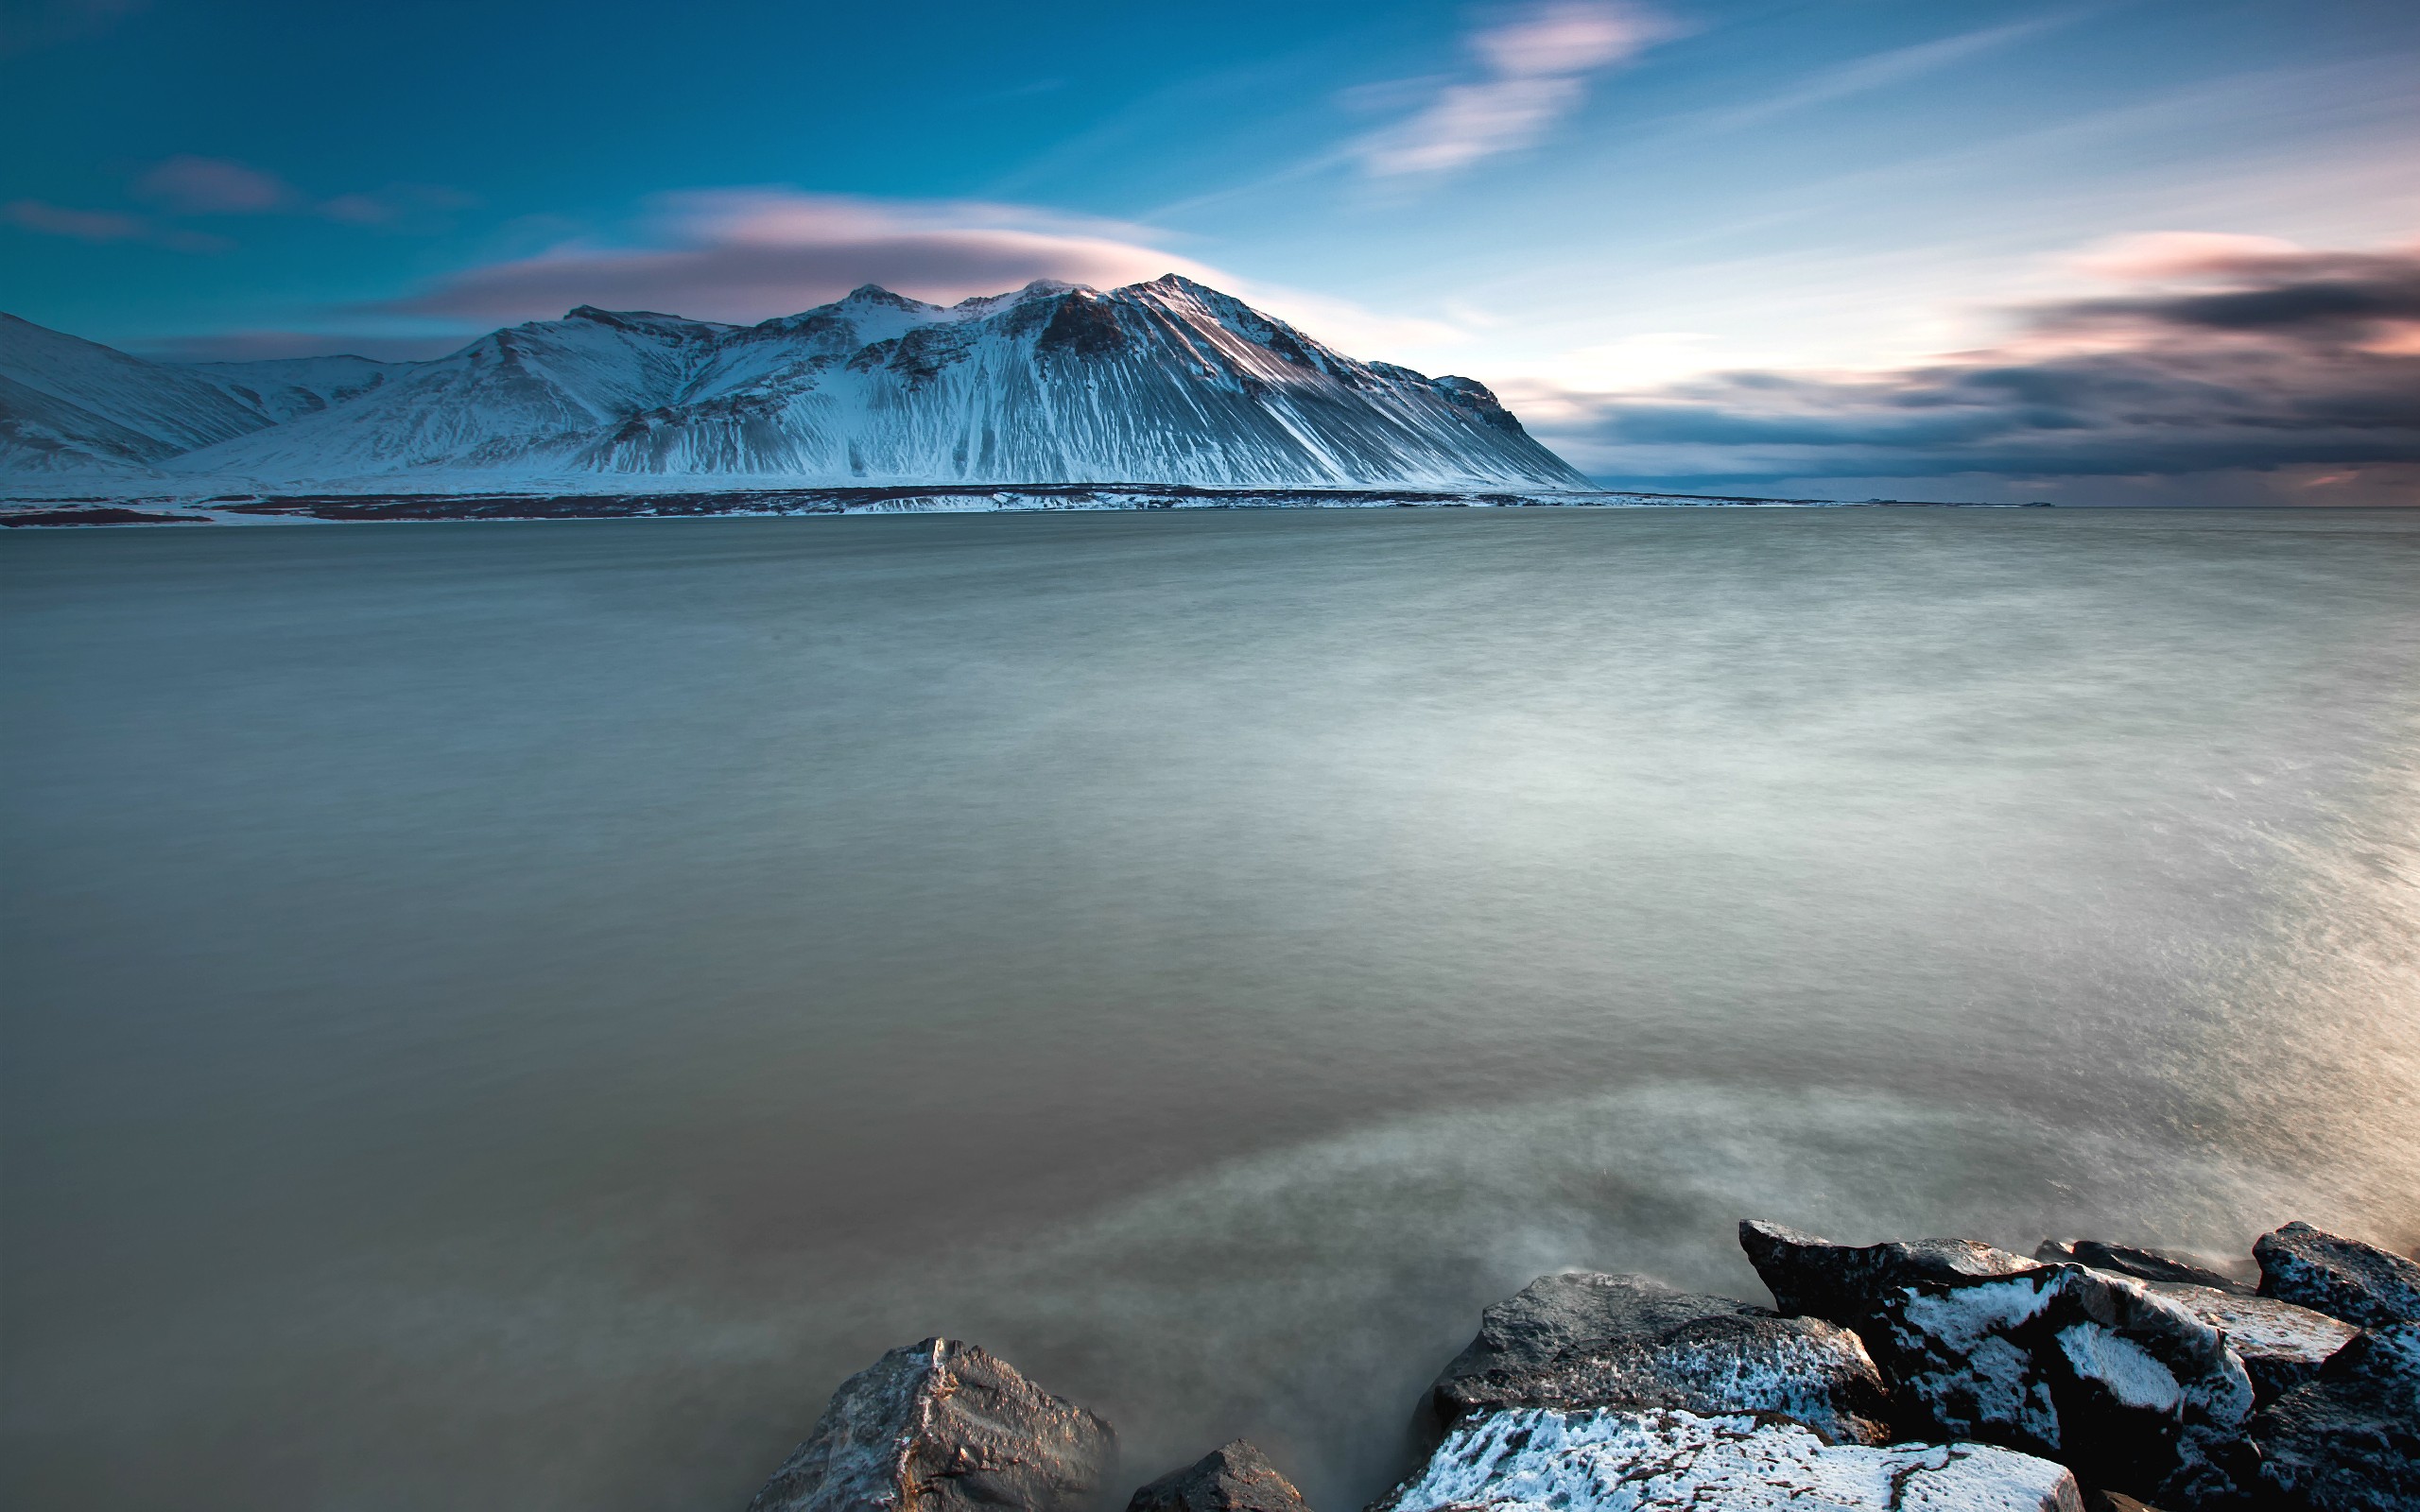 mountains, Ocean, Landscapes, Snow, Coast, Sea, Iceland, Skyscapes Wallpaper